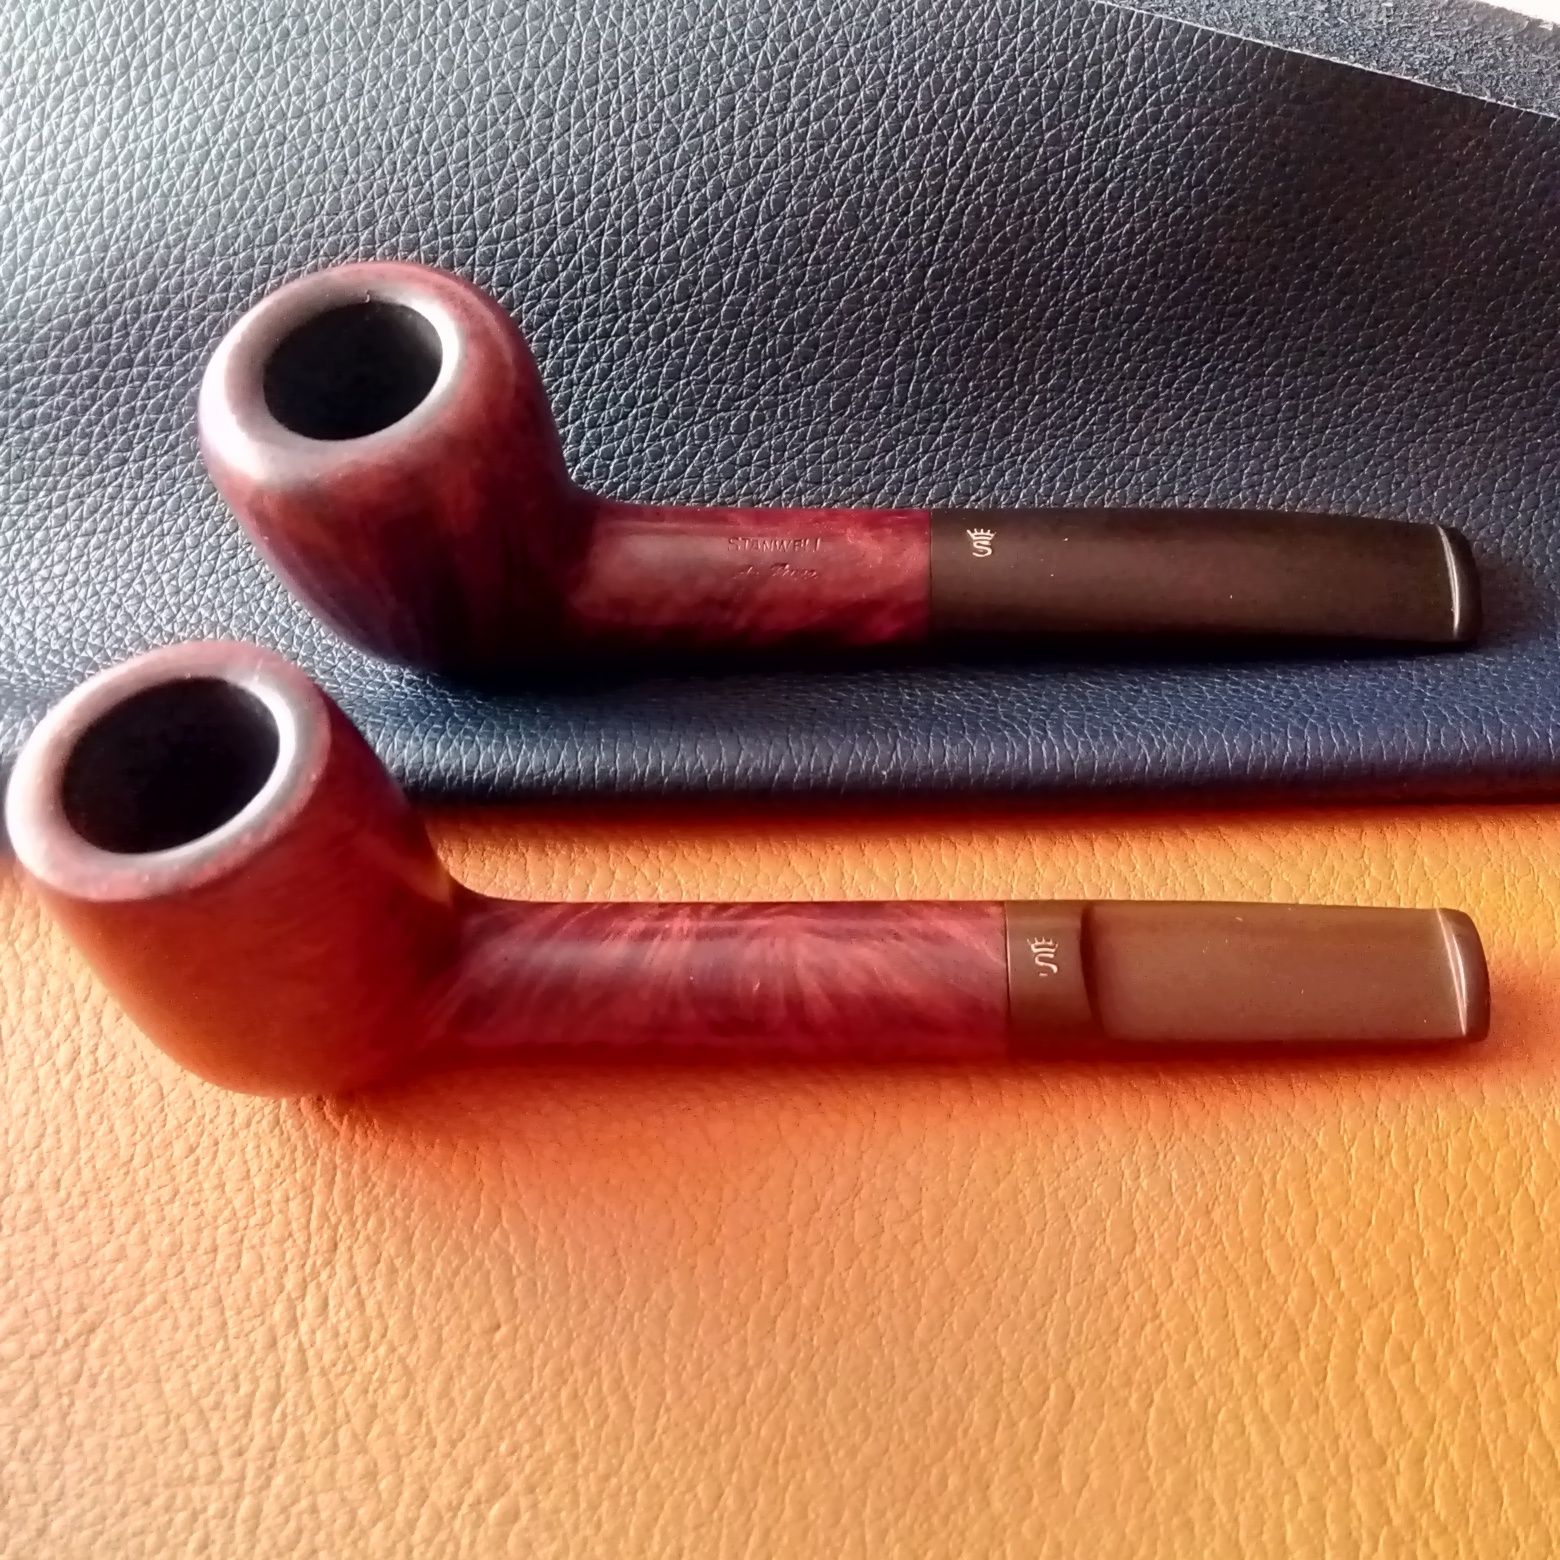 STANWELL de Luxe, dois cachimbos dinamarqueses